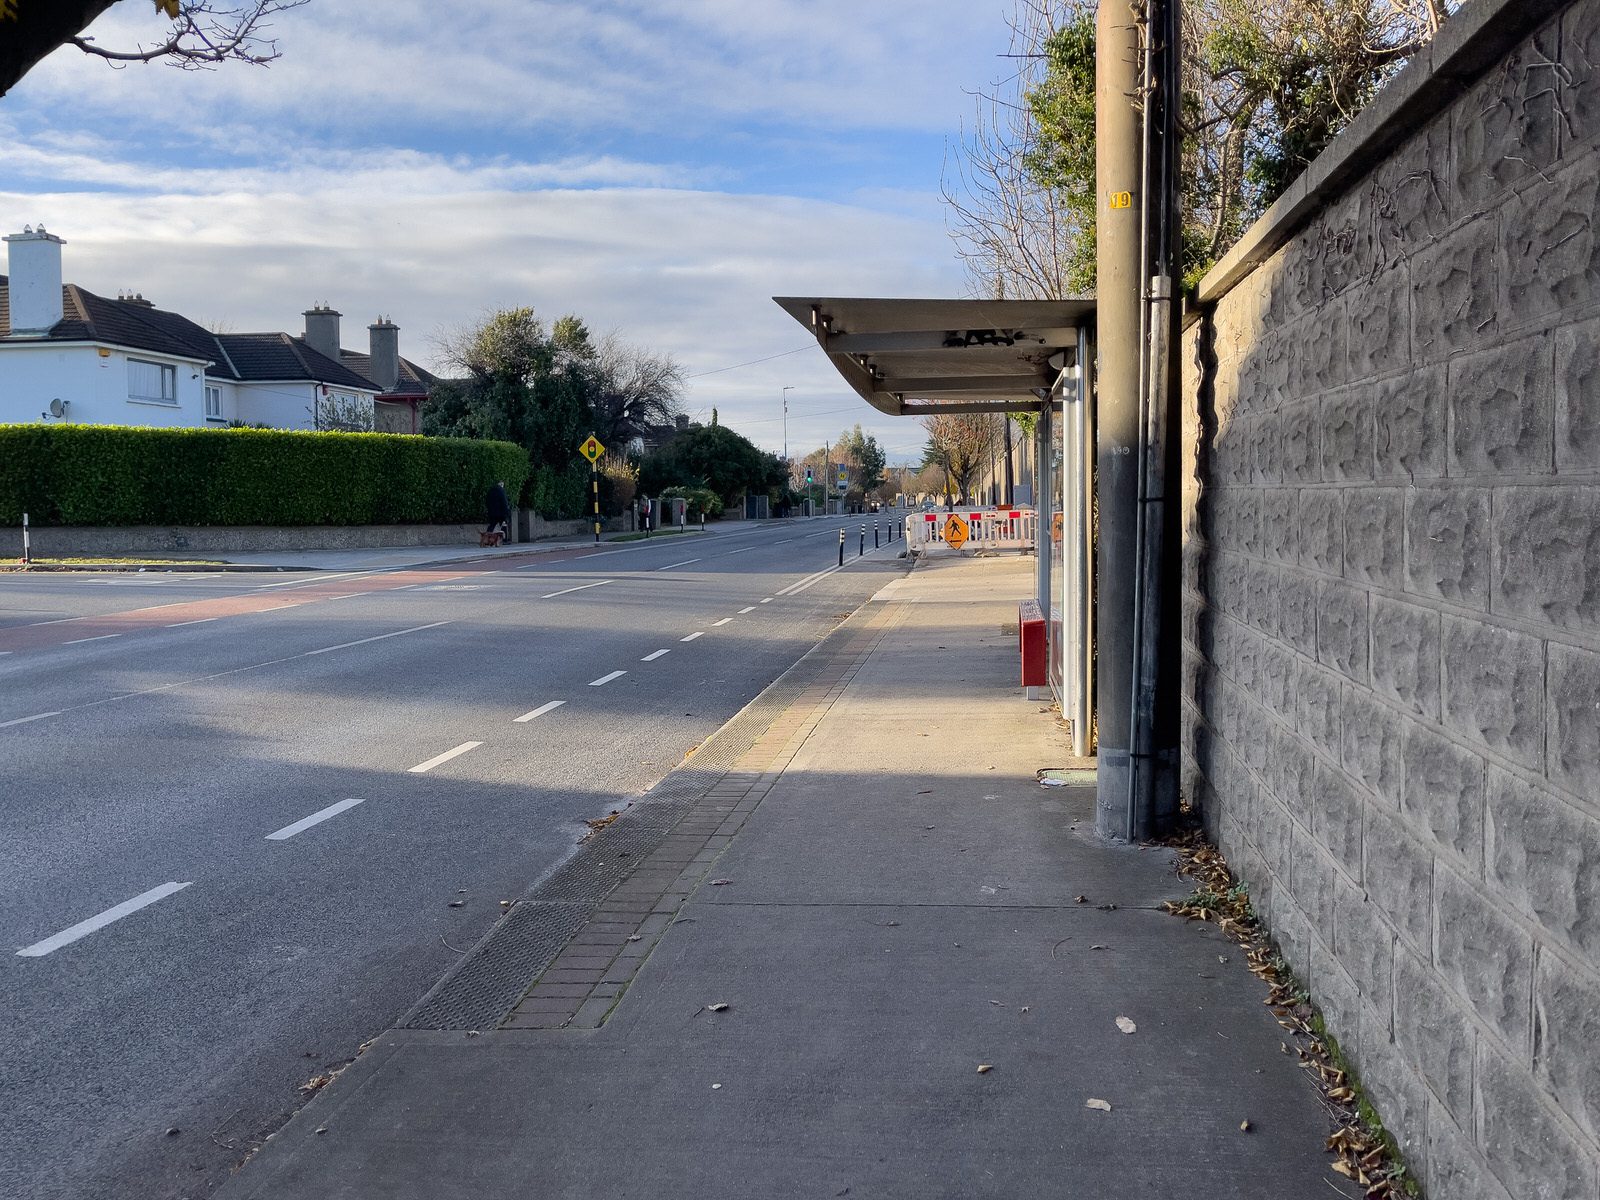 MY FIRST DAY WITHOUT THE 17 BUS SERVICE [WALK FROM S4 BUS STOP IN UCD TO ROEBUCK ROAD]-225590-1